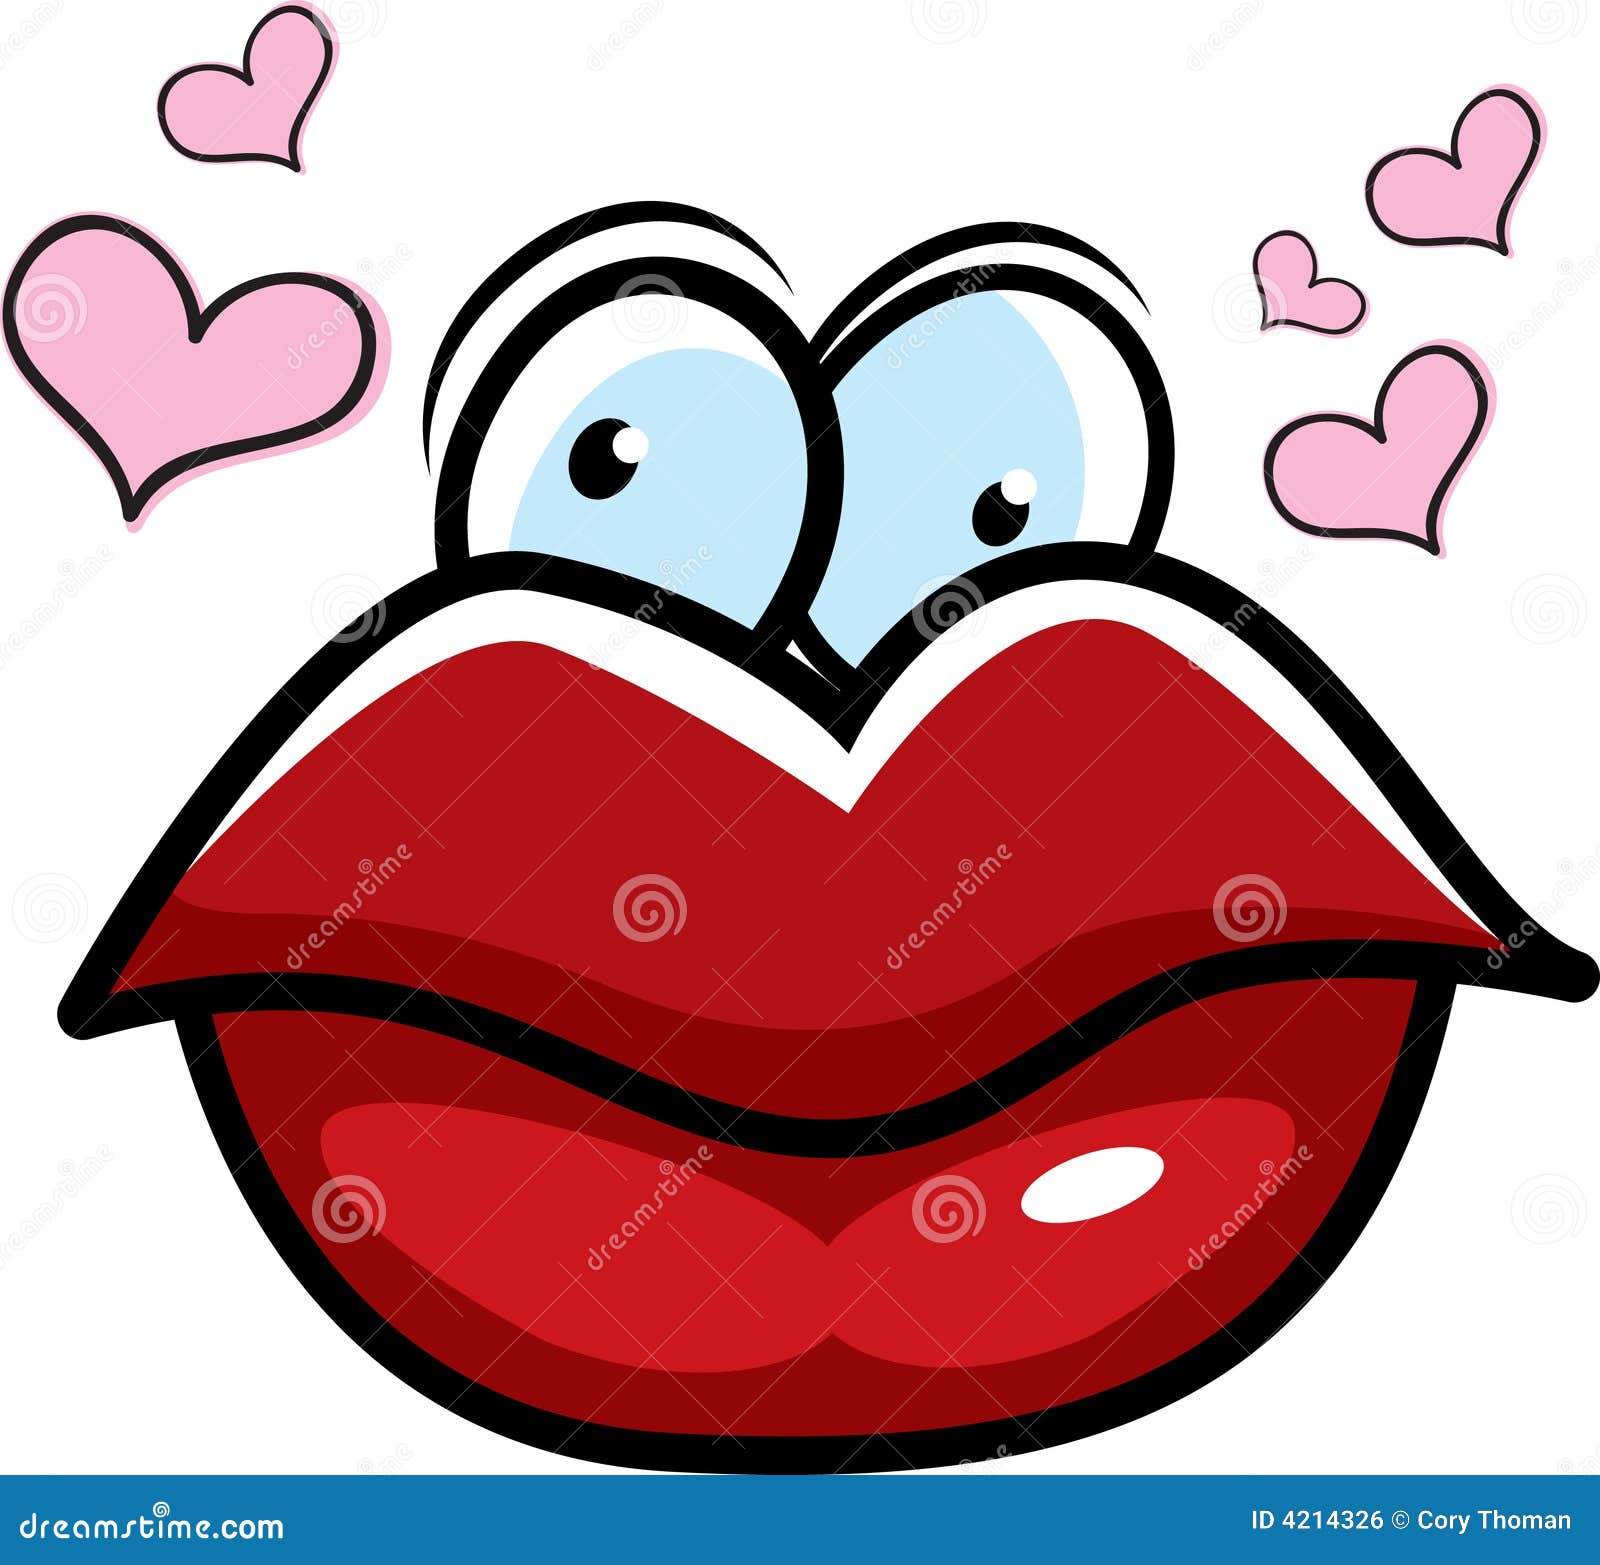 free animated kisses clipart - photo #29